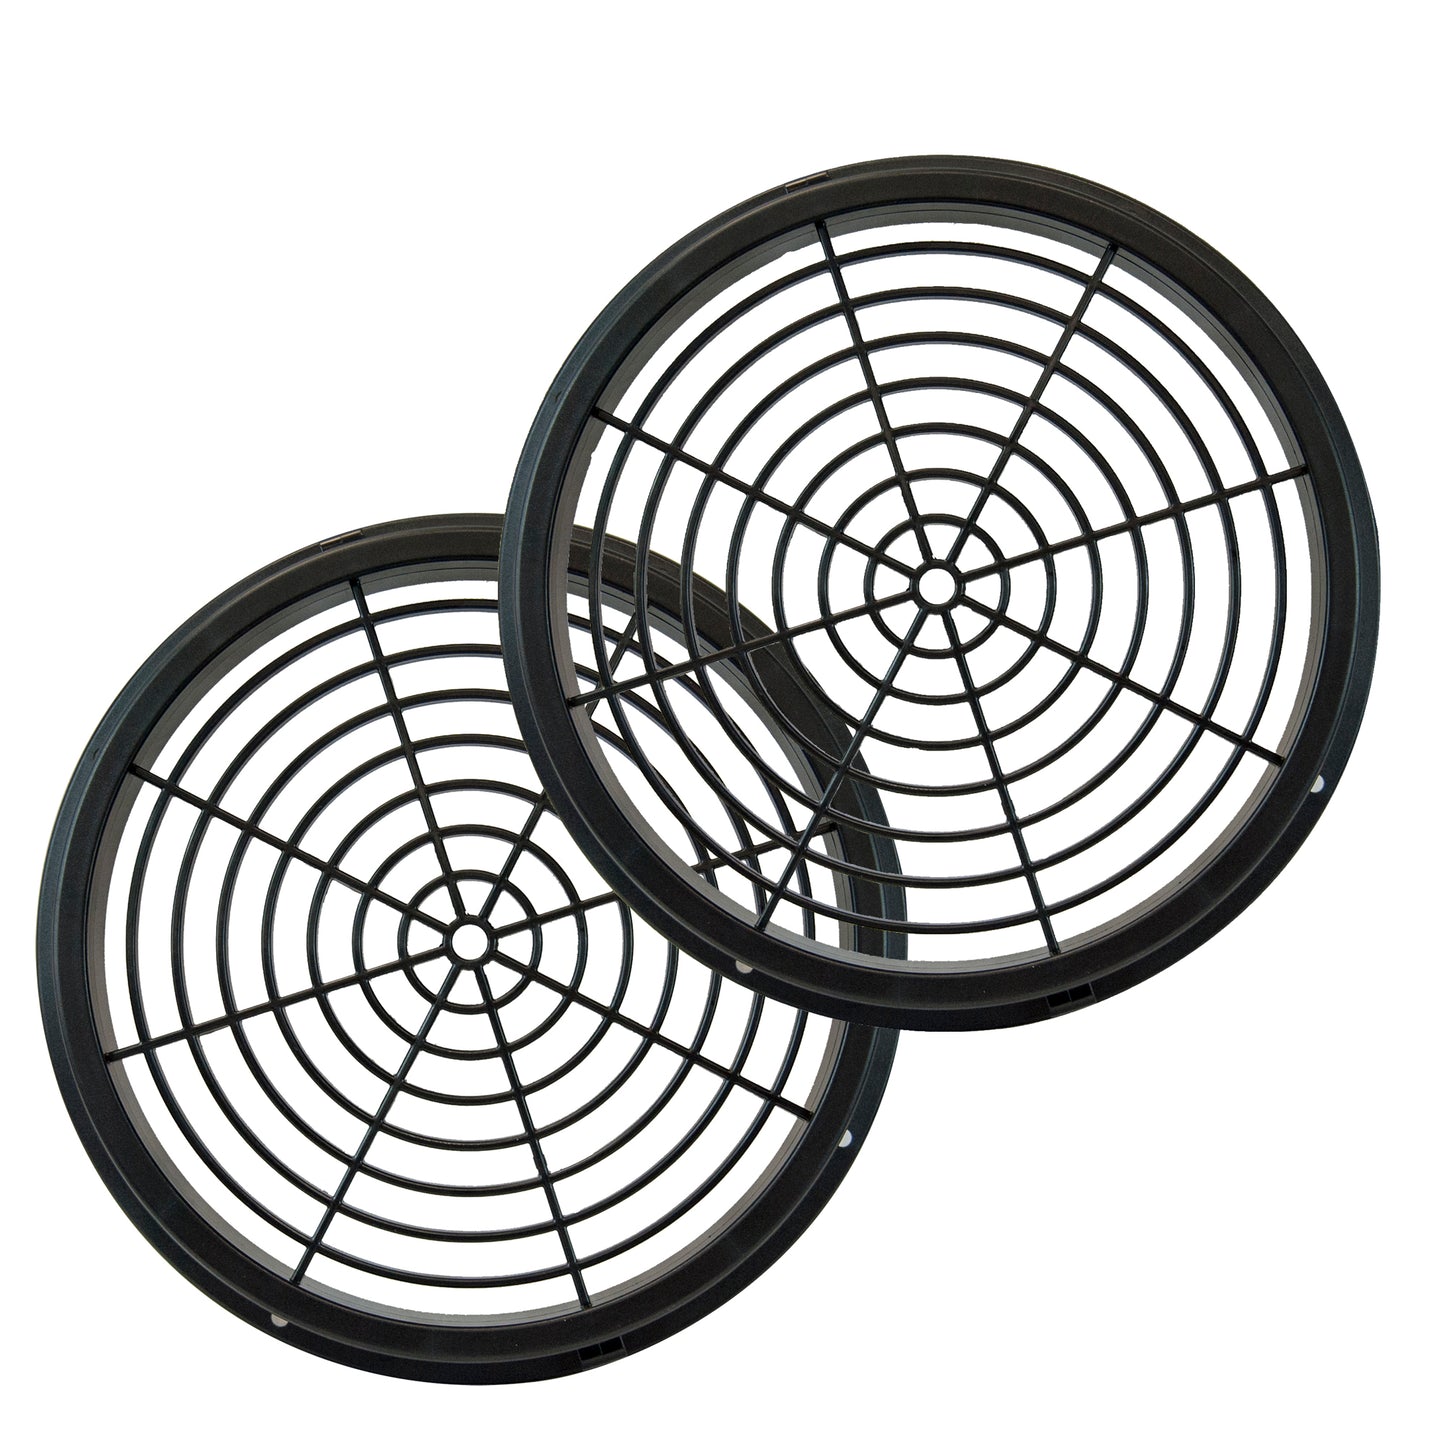 Air Inlet/Outlet for X-12 Confined Space Fan